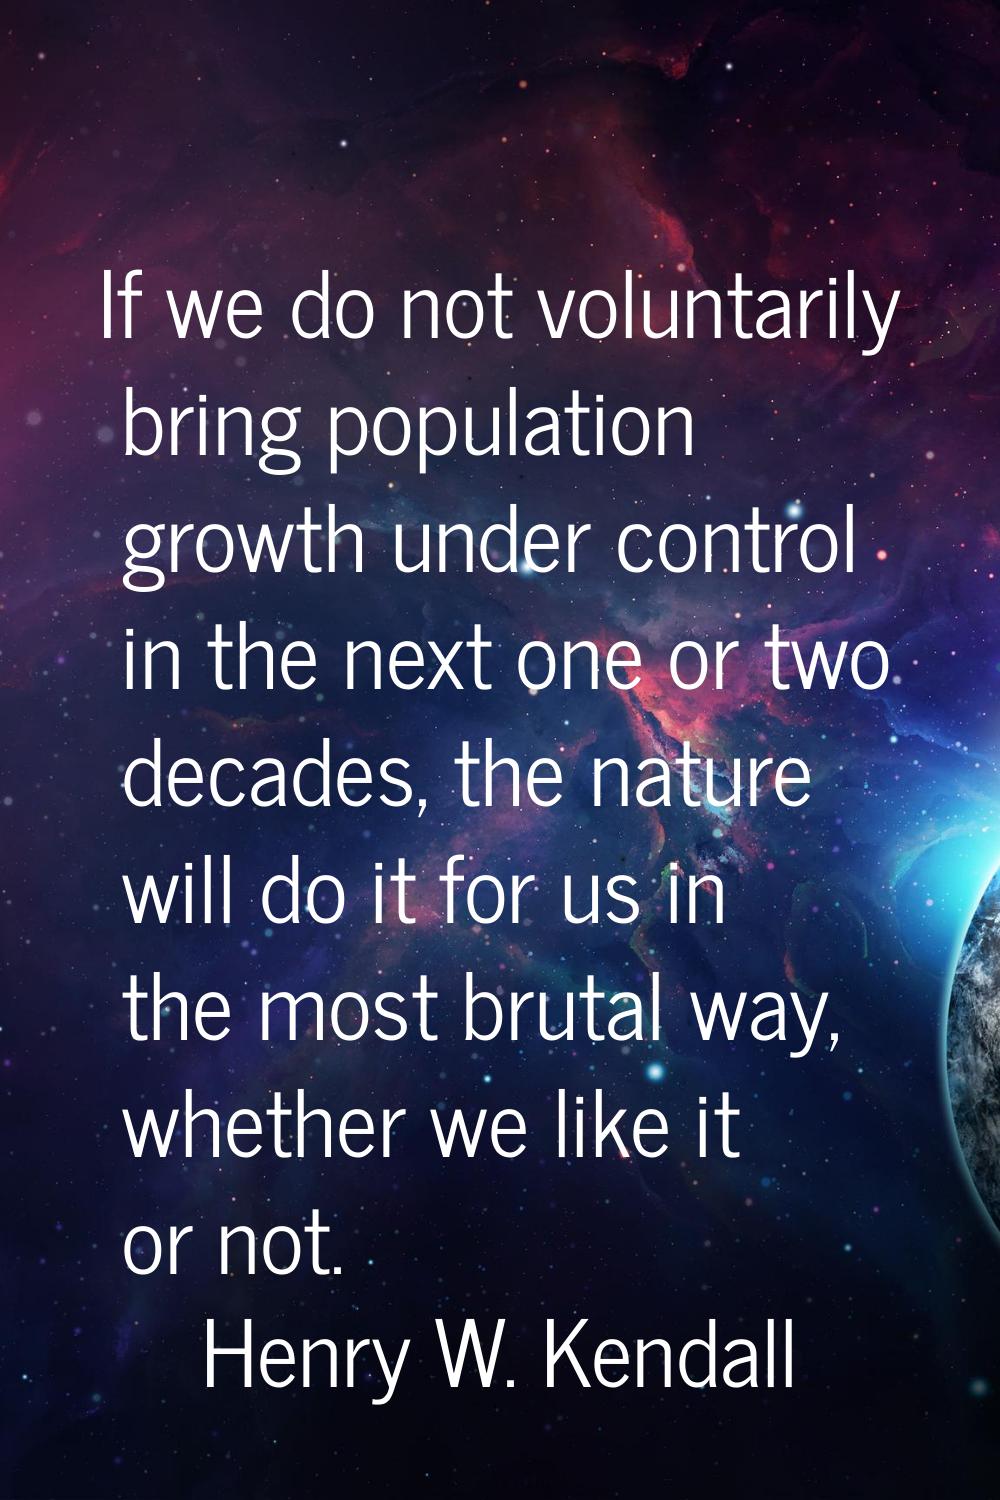 If we do not voluntarily bring population growth under control in the next one or two decades, the 